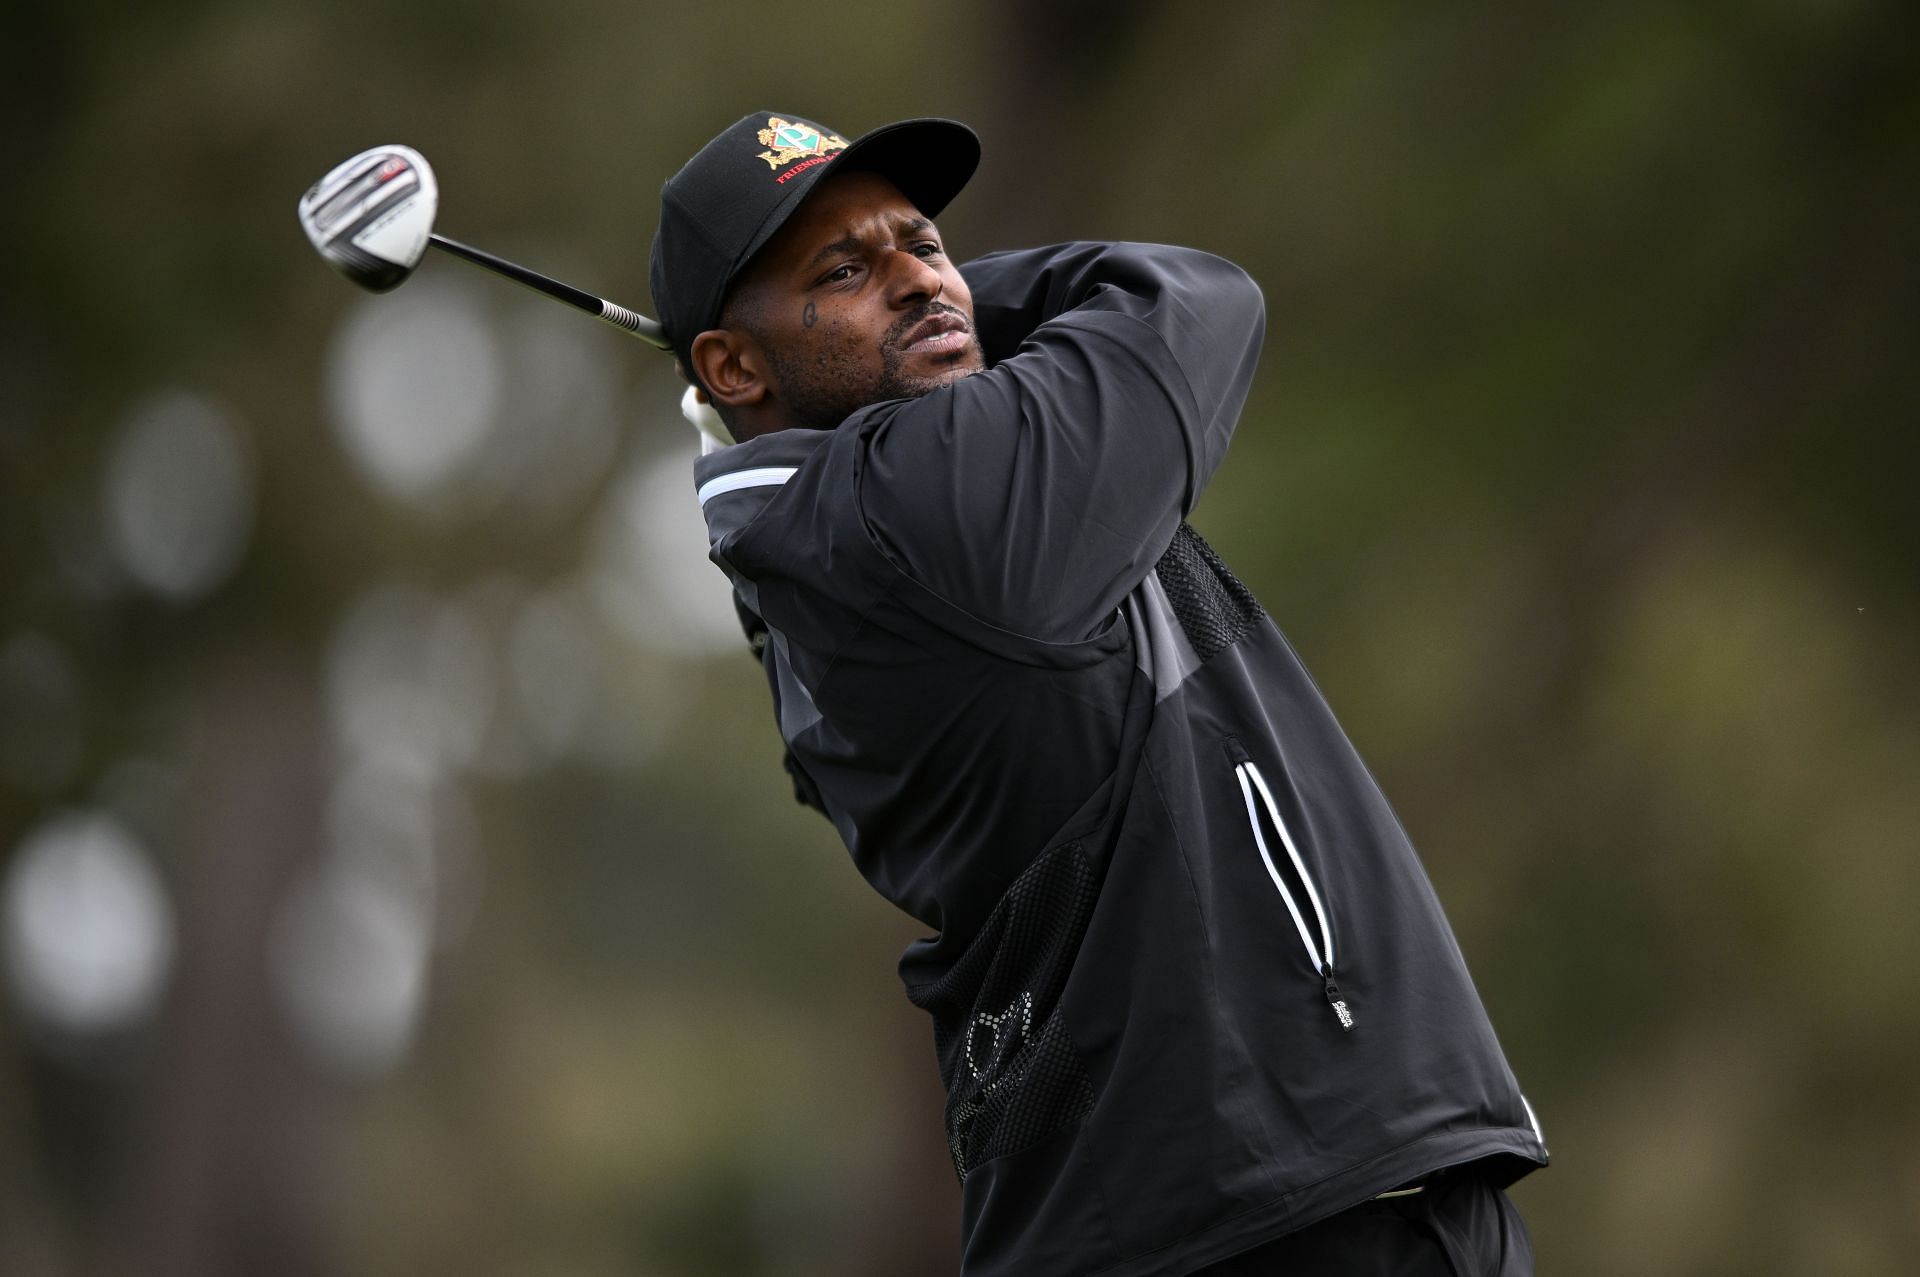 ScHoolboy Q plays his shot from the fifth tee during the second round of the AT&amp;T Pebble Beach Pro-Am at Monterey Peninsula Country Club on February 03, 2023 (Photo by Orlando Ramirez/Getty Images)